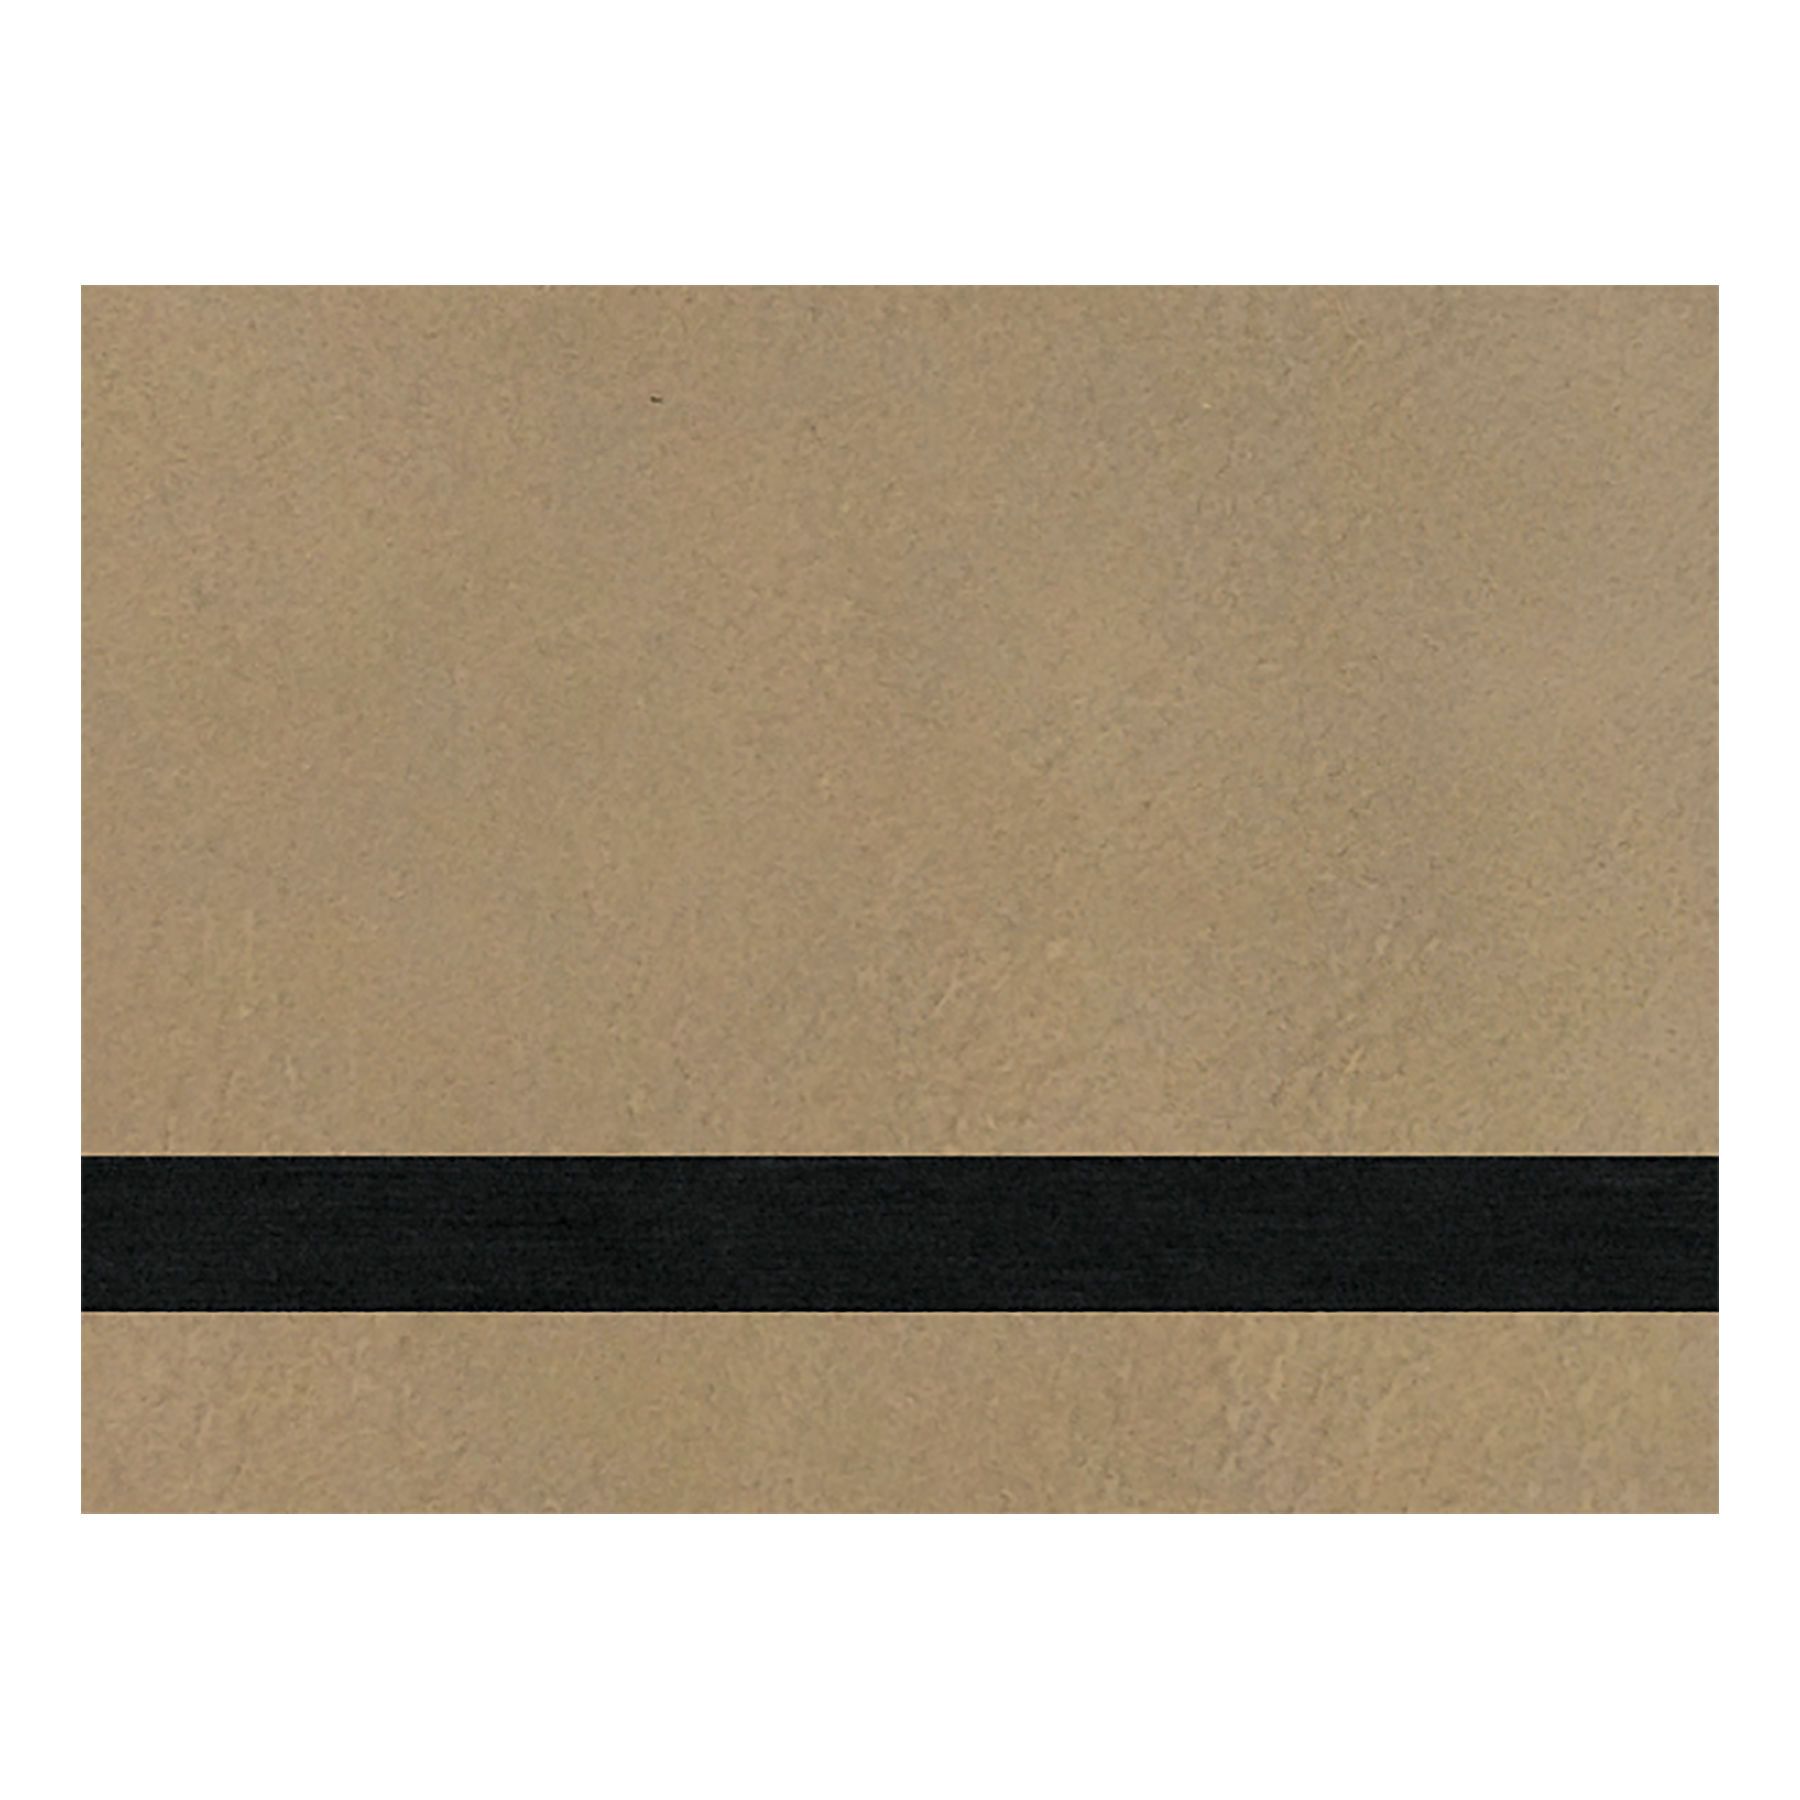 PRE-ORDER! Full Size Laserable Leatherette Sheet Stock, Omtech Laser Engravers (Available Jan. 2022) Engraving Supplies Craftworks NW 24x16 (24" x 16") Light Brown/Black 